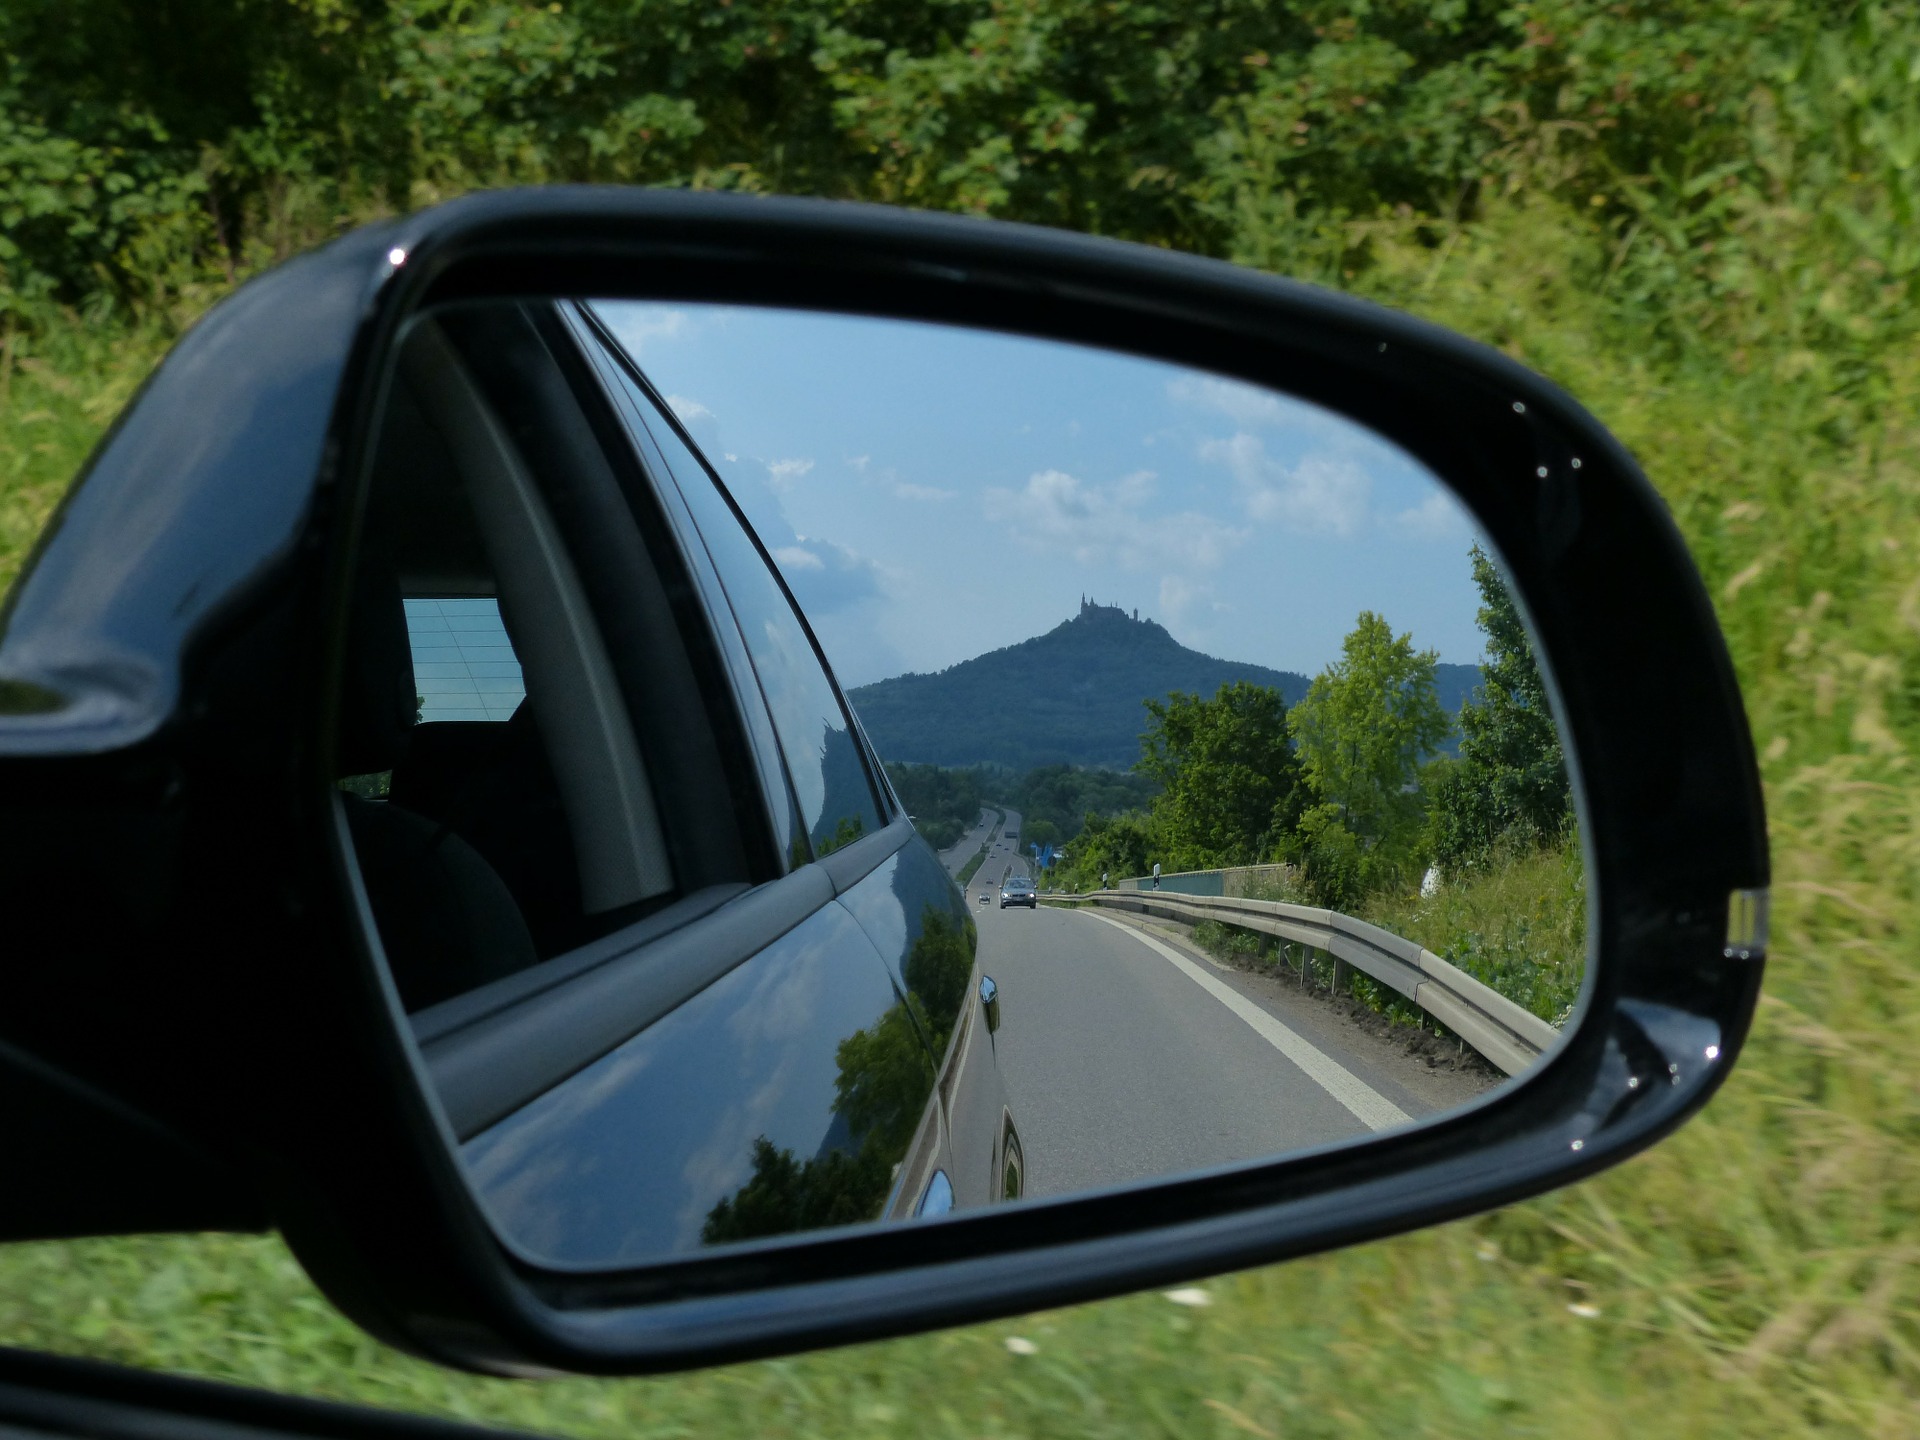 Farewell to image in rearview mirror